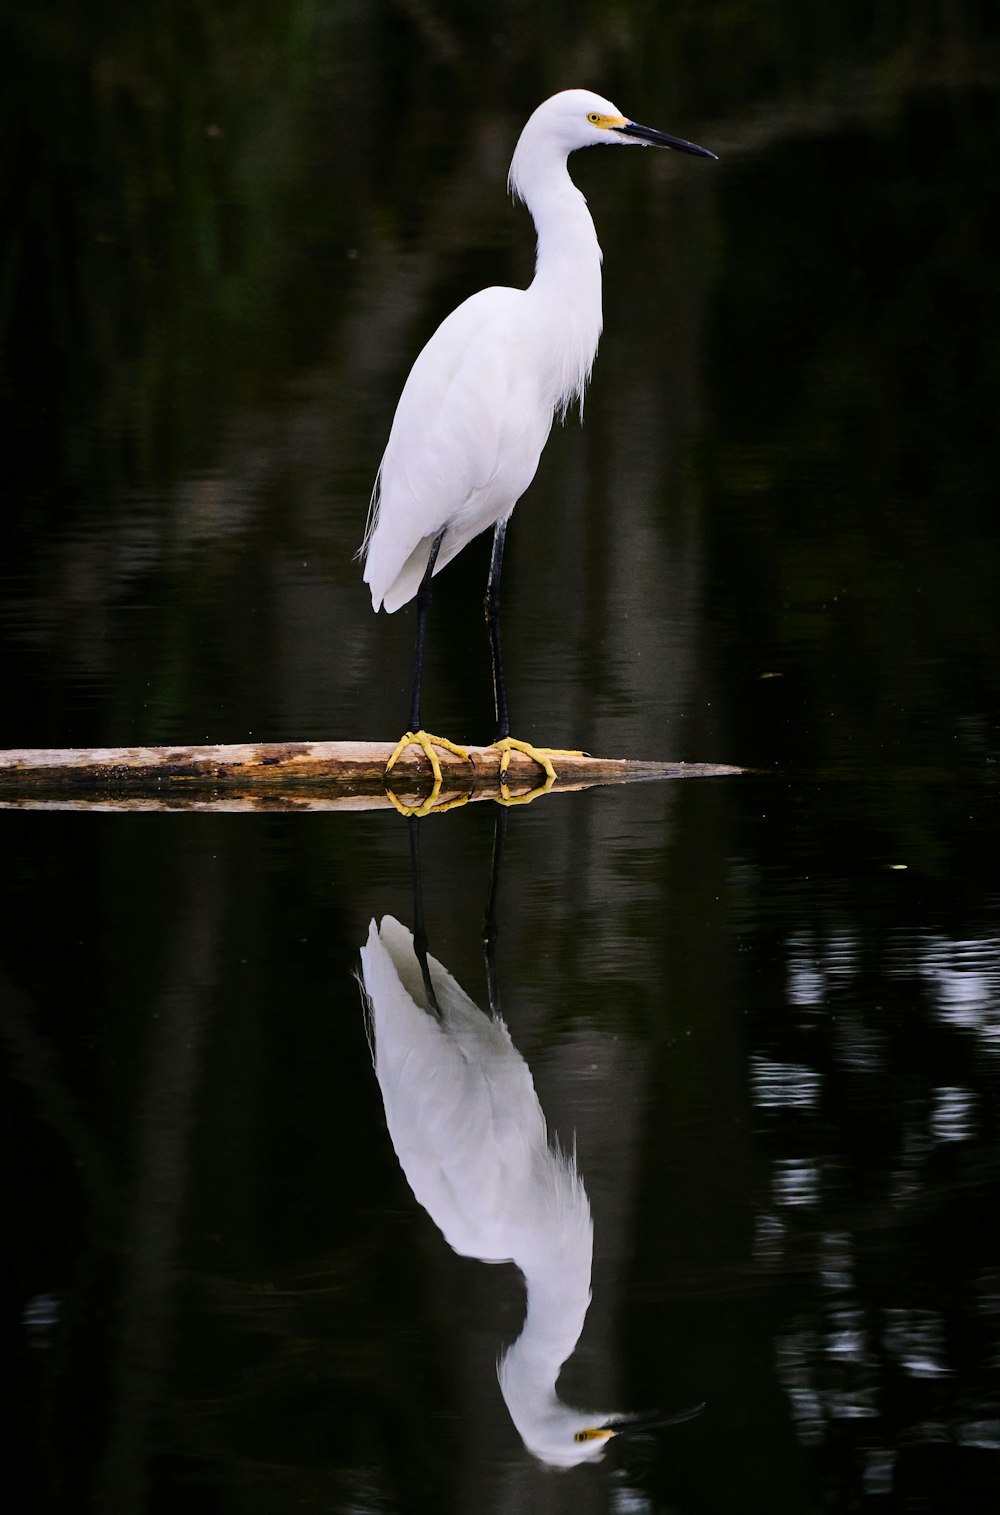 a white bird is standing on a stick in the water